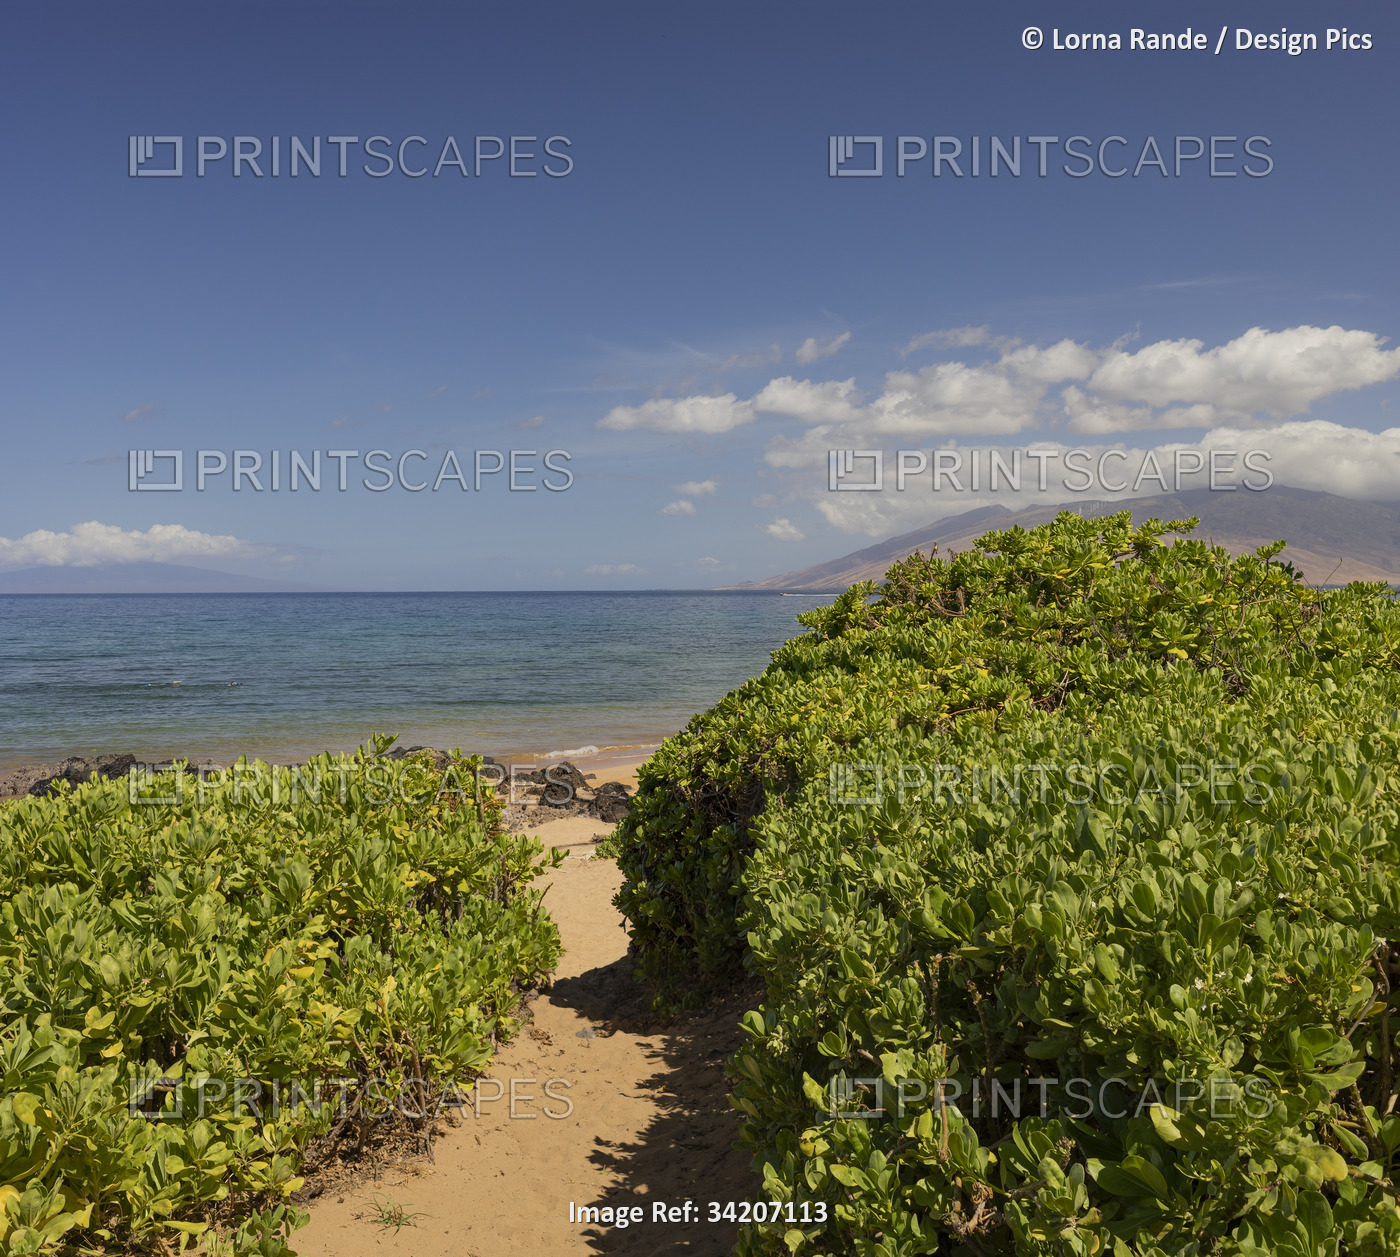 Secluded, sandy pathway through the green foliage to the beach along the shore ...